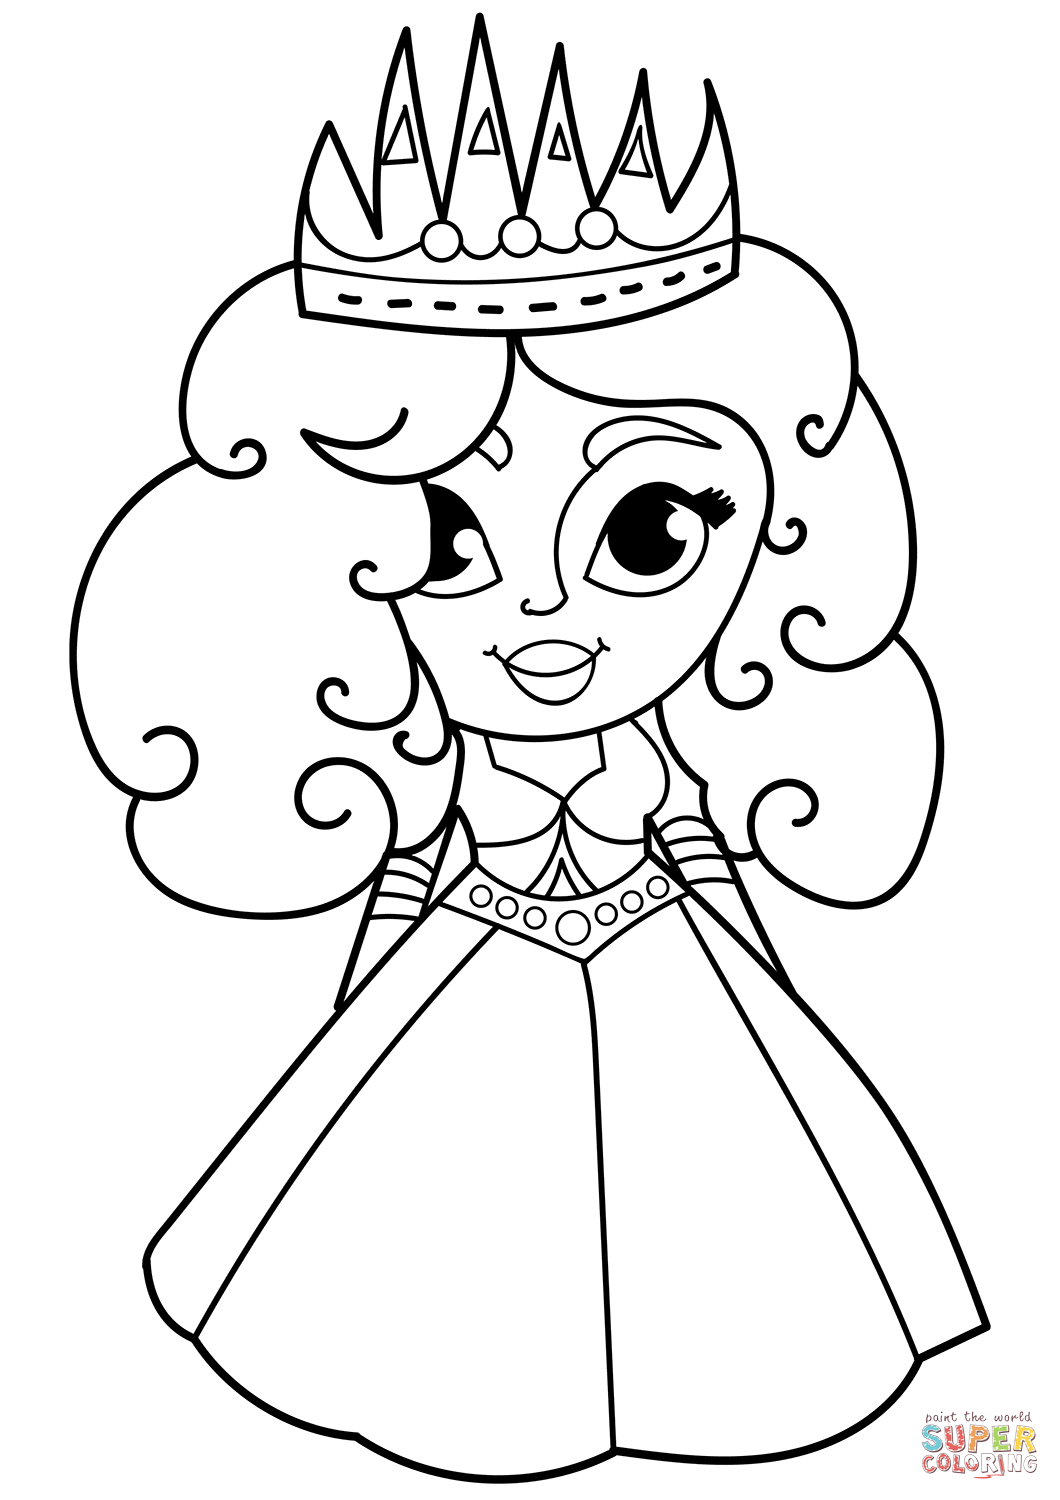 Cartoon princess coloring page free printable coloring pages